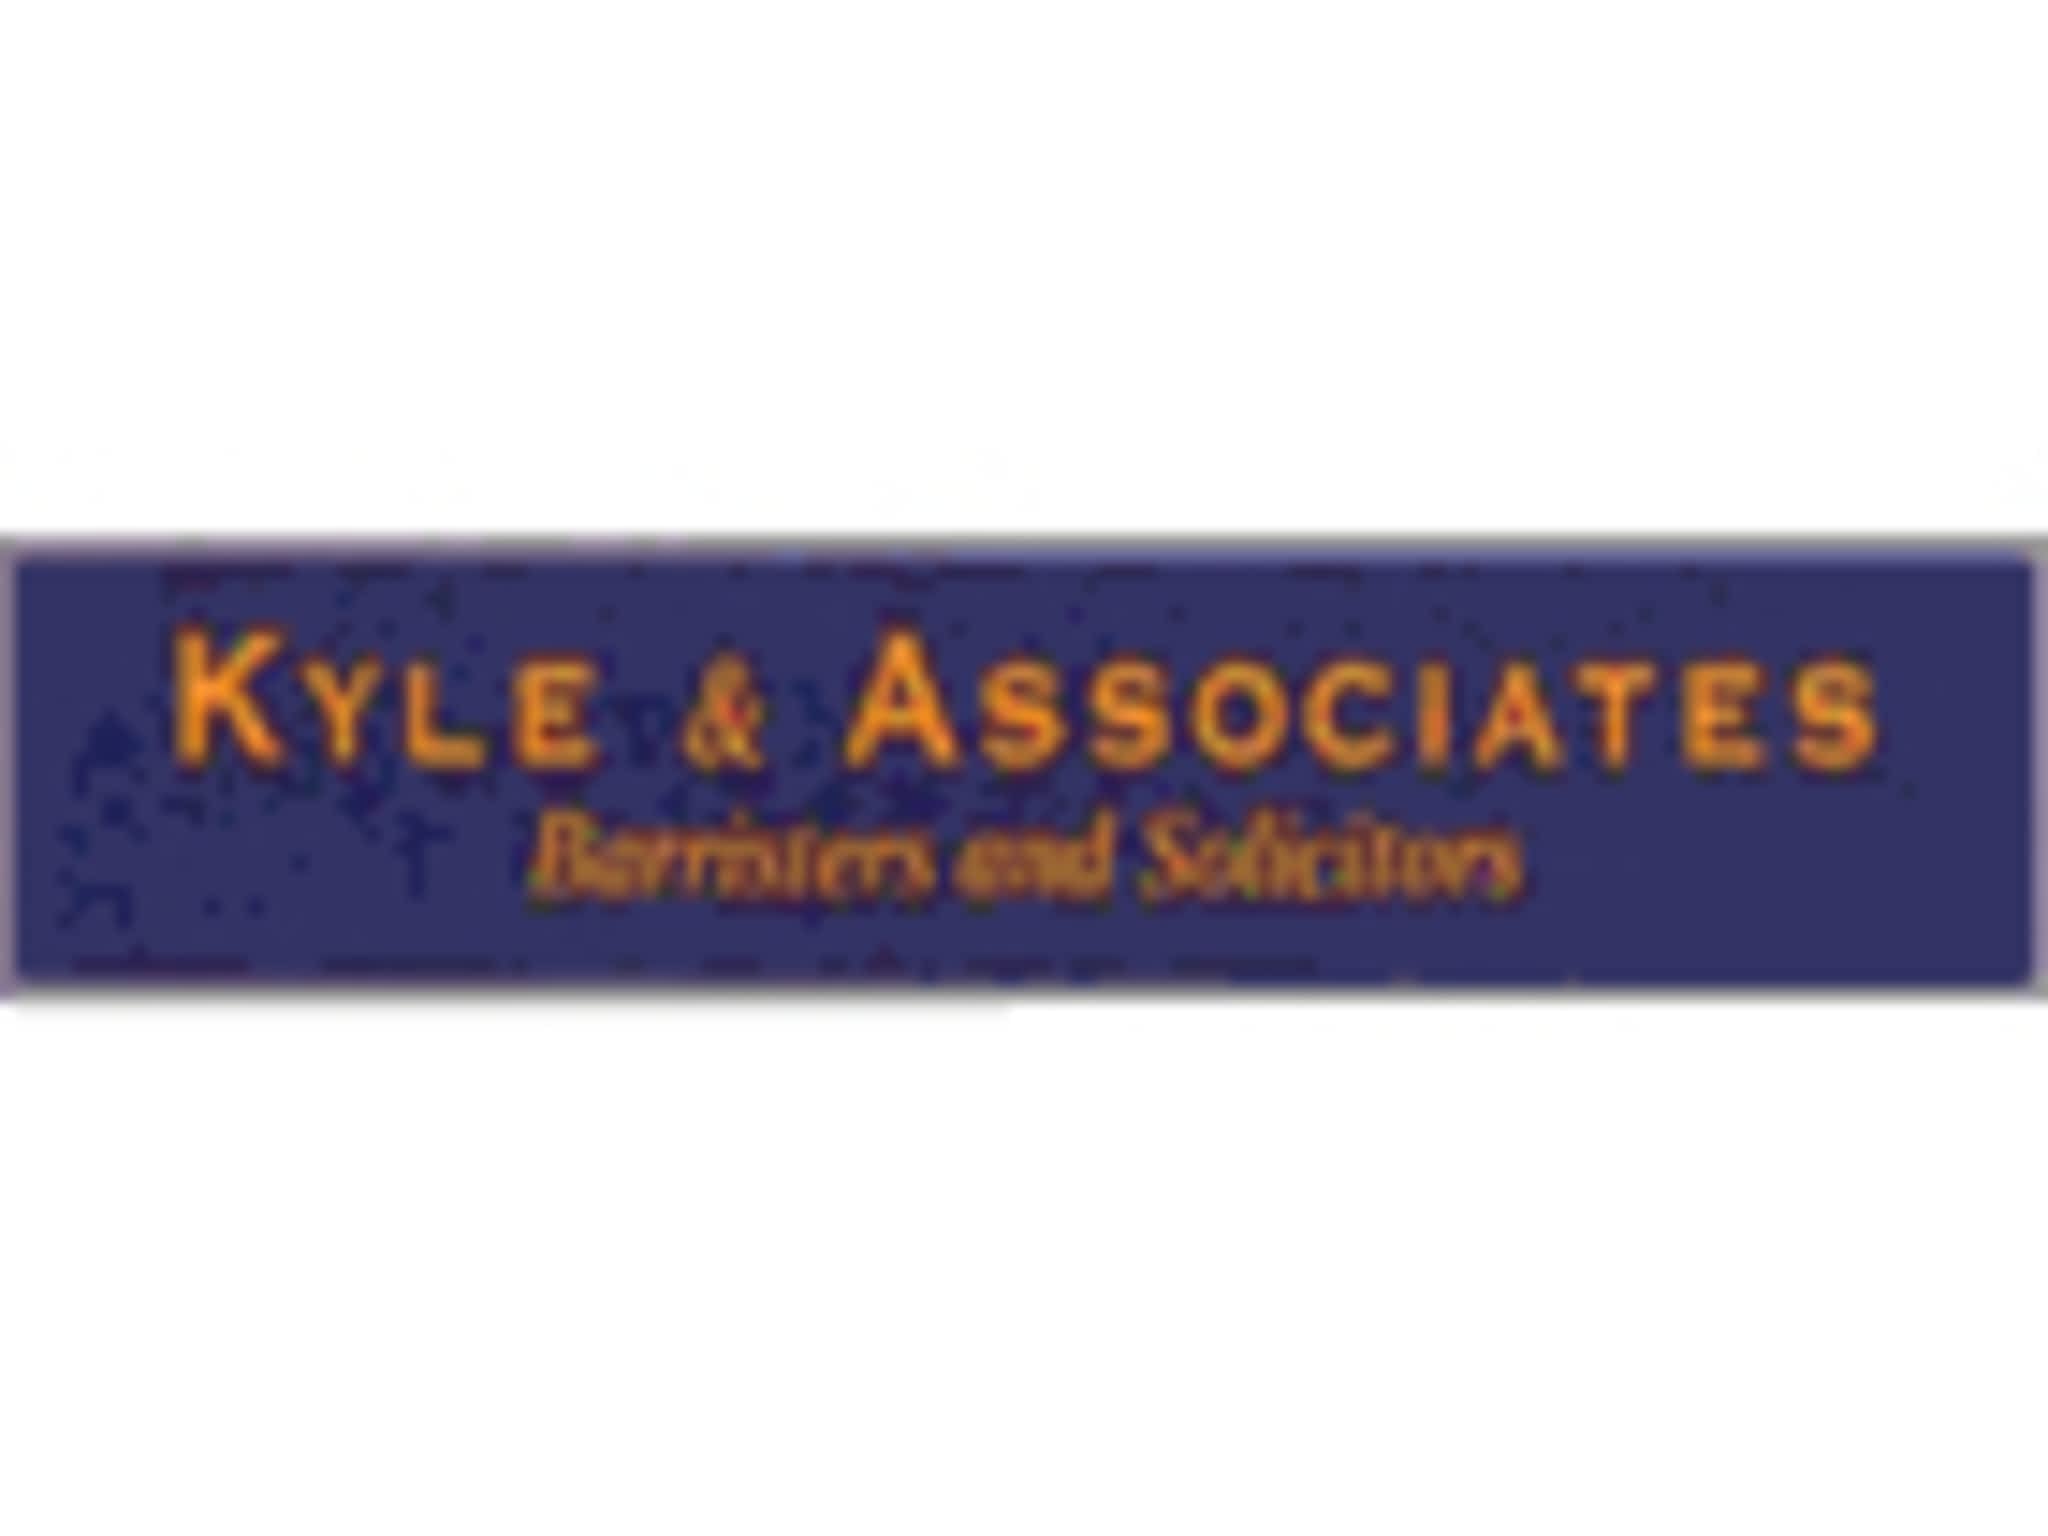 photo Kyle & Associates Barristers and Solicitors